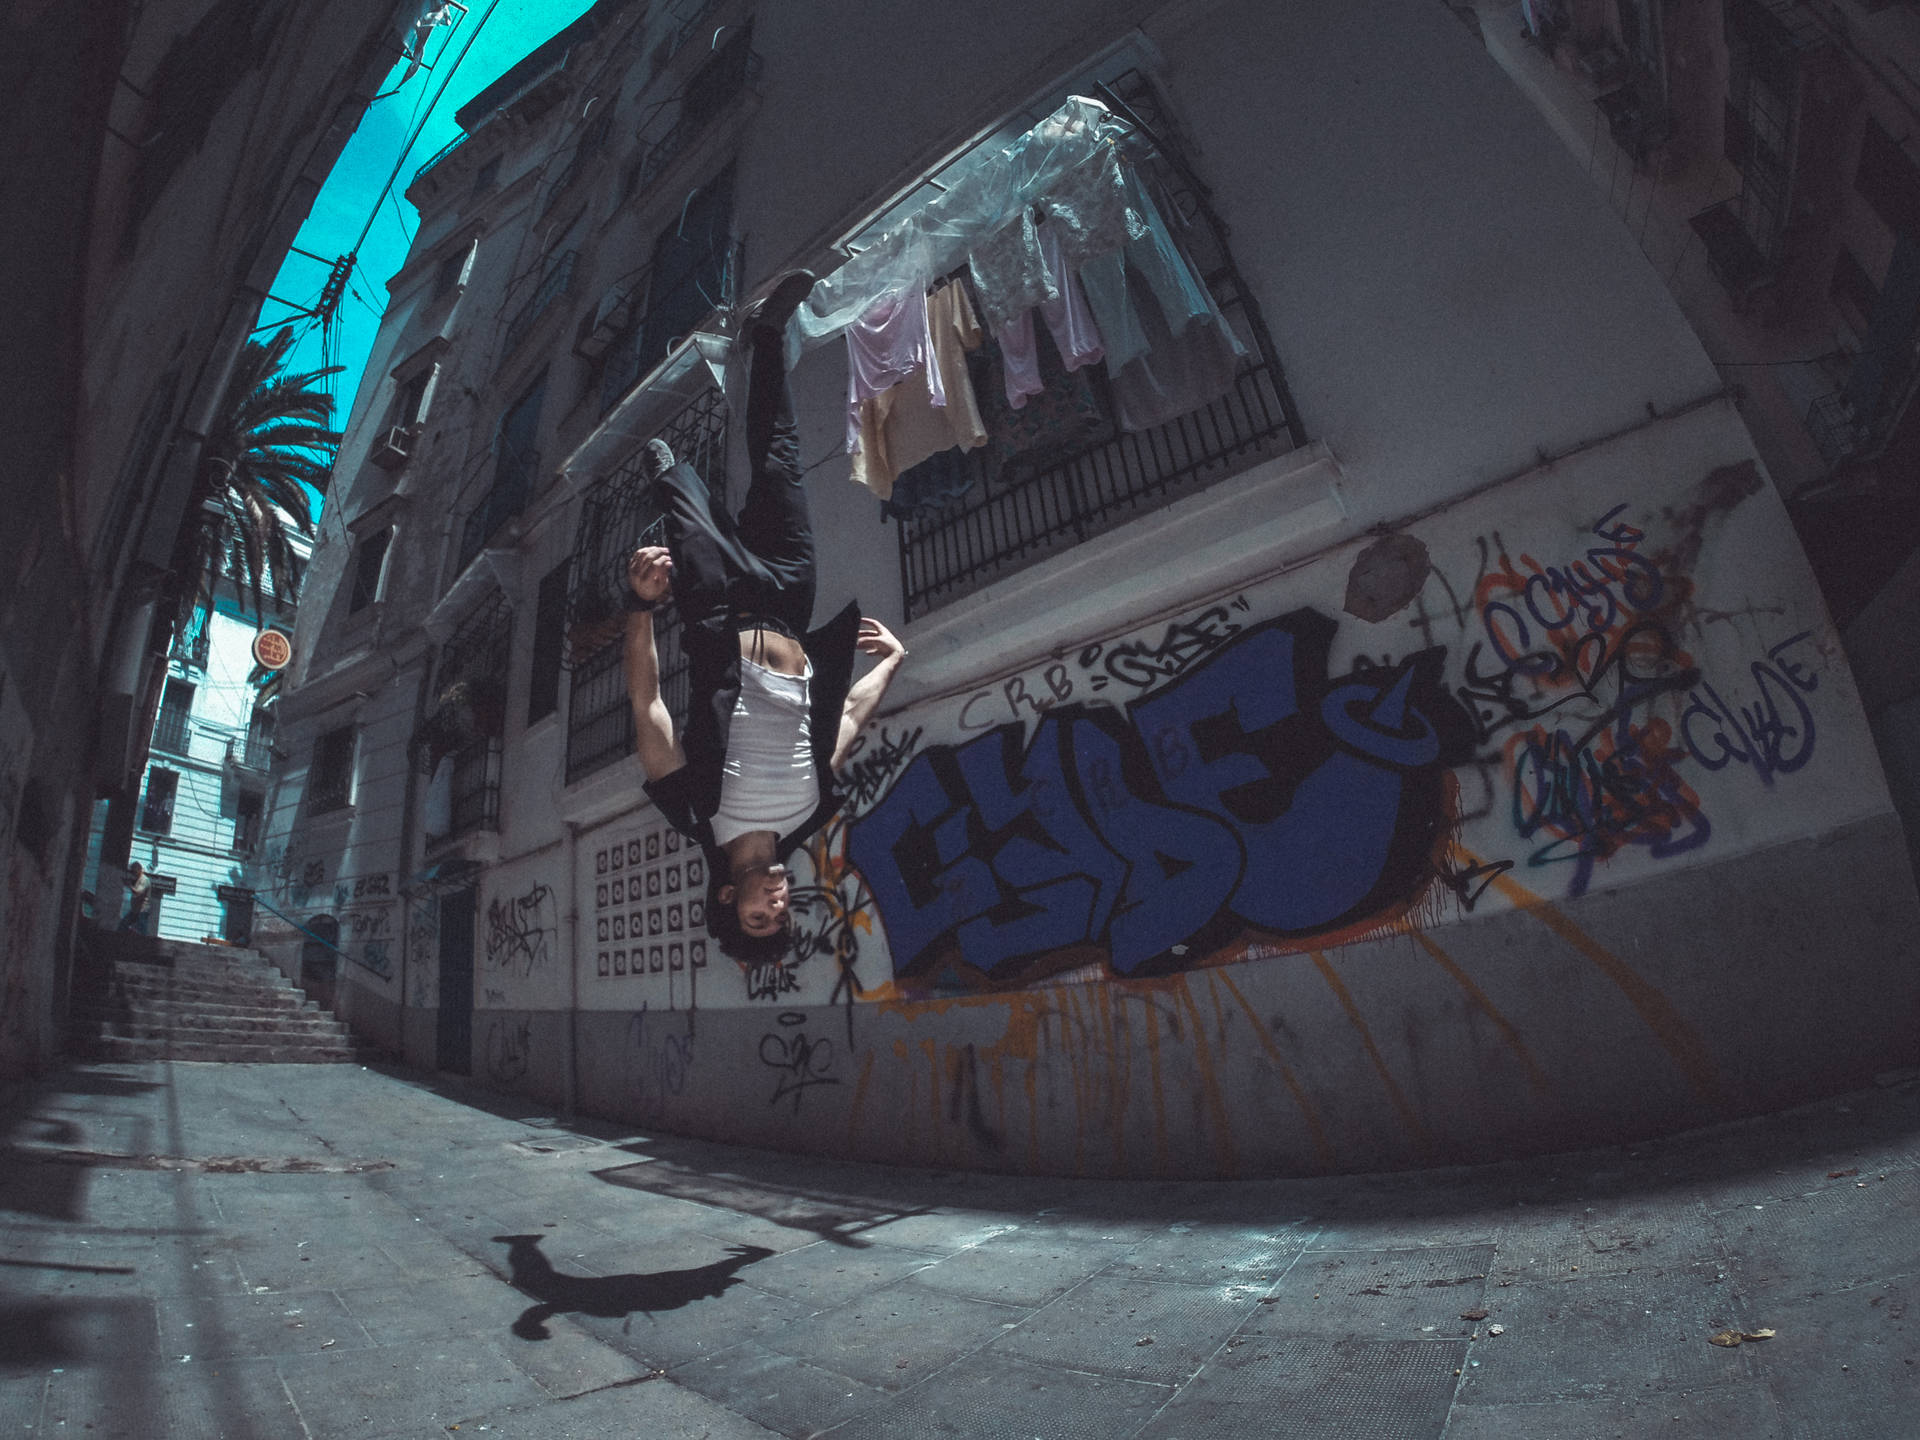 Man Performing Areal Parkour